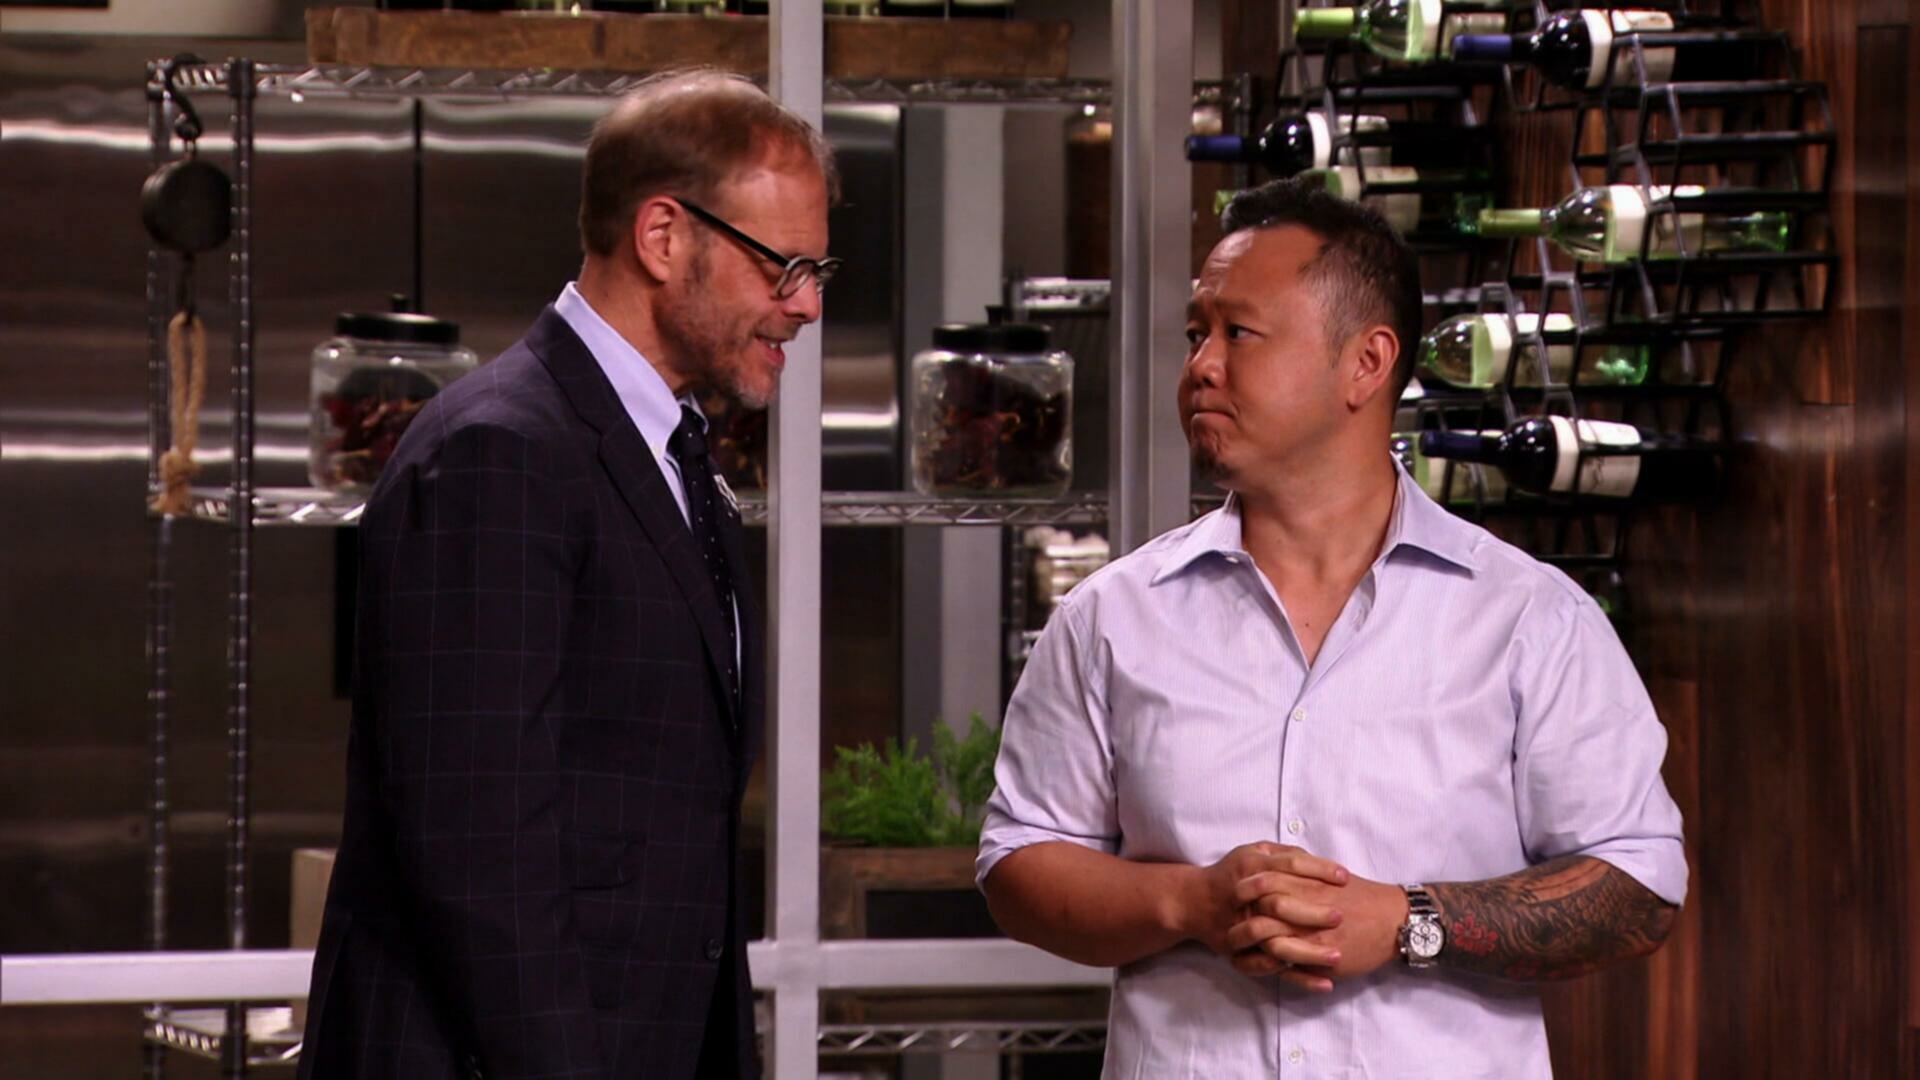 Cutthroat Kitchen S06E09 I Would Do Anything for Loaf 1080p AMZN WEB DL DDP 2 0 H 264 FLUX TGx